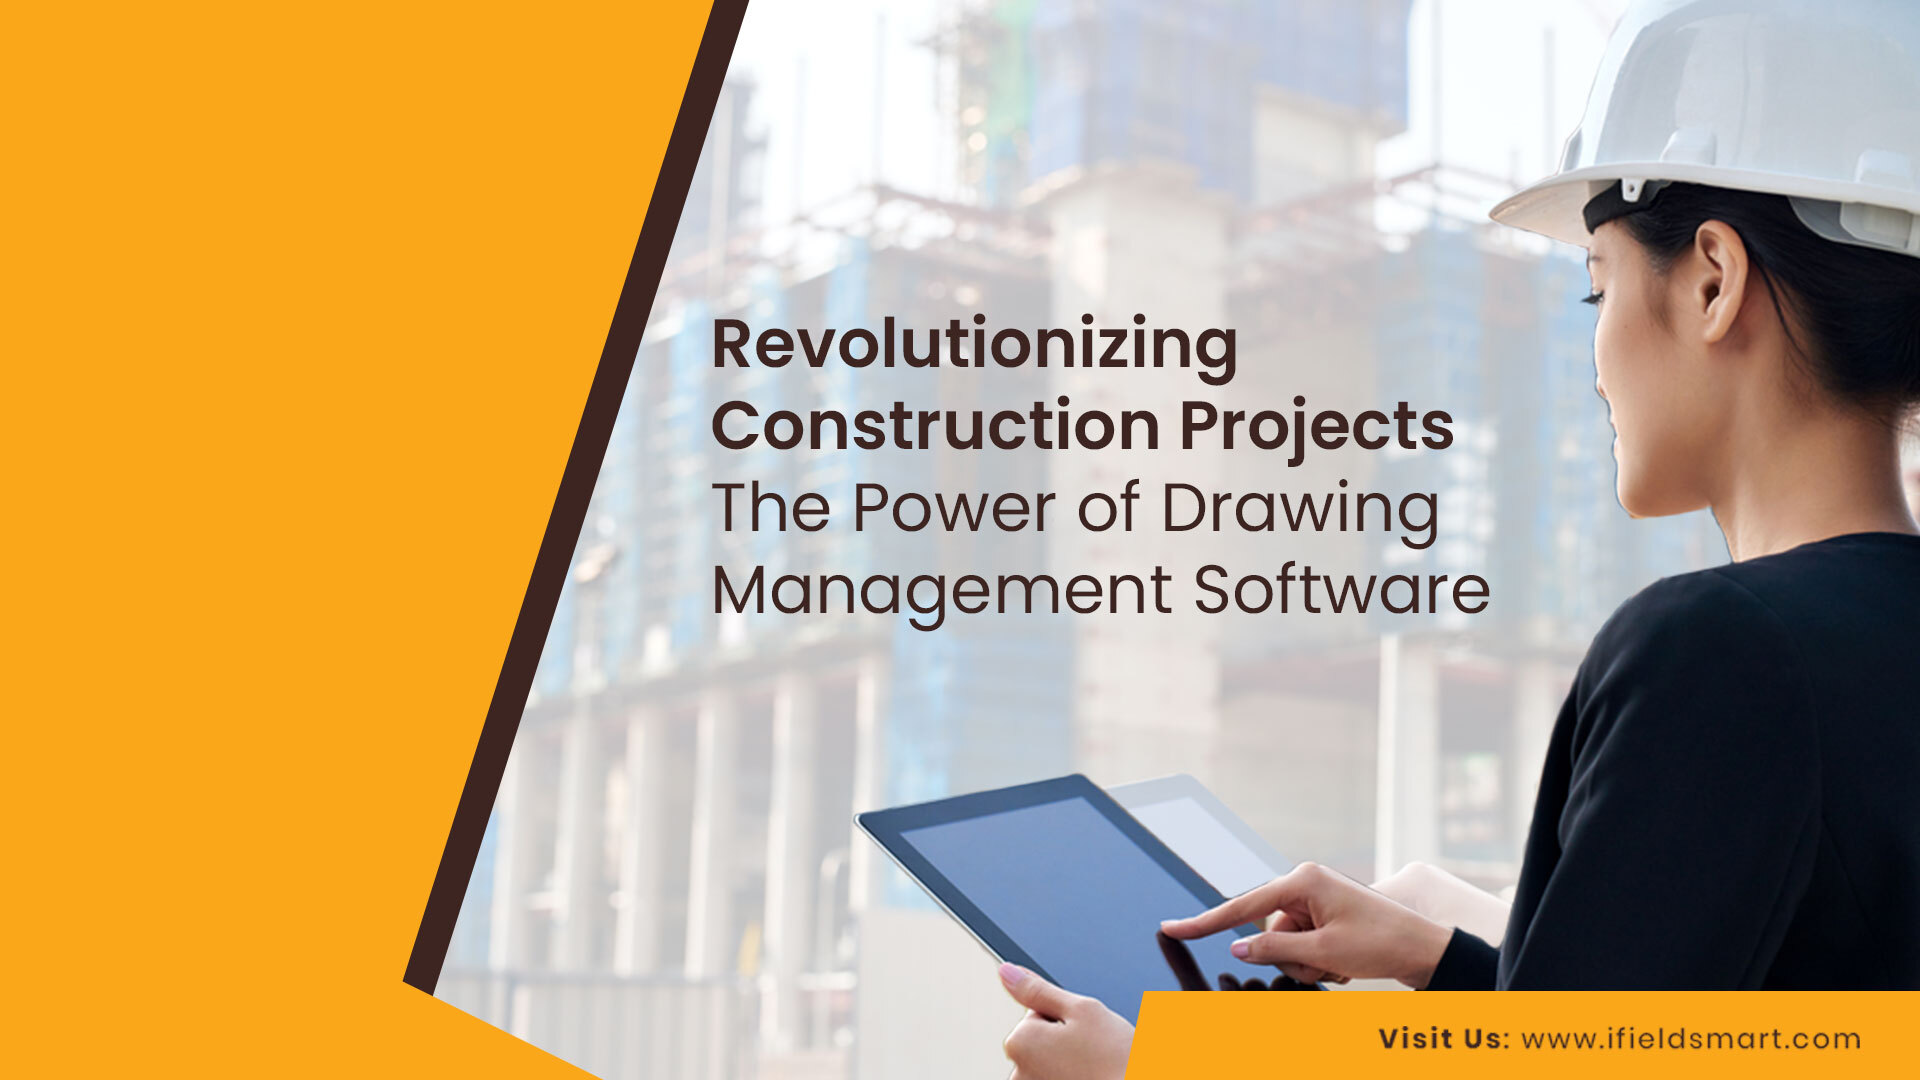 Construction drawing management software